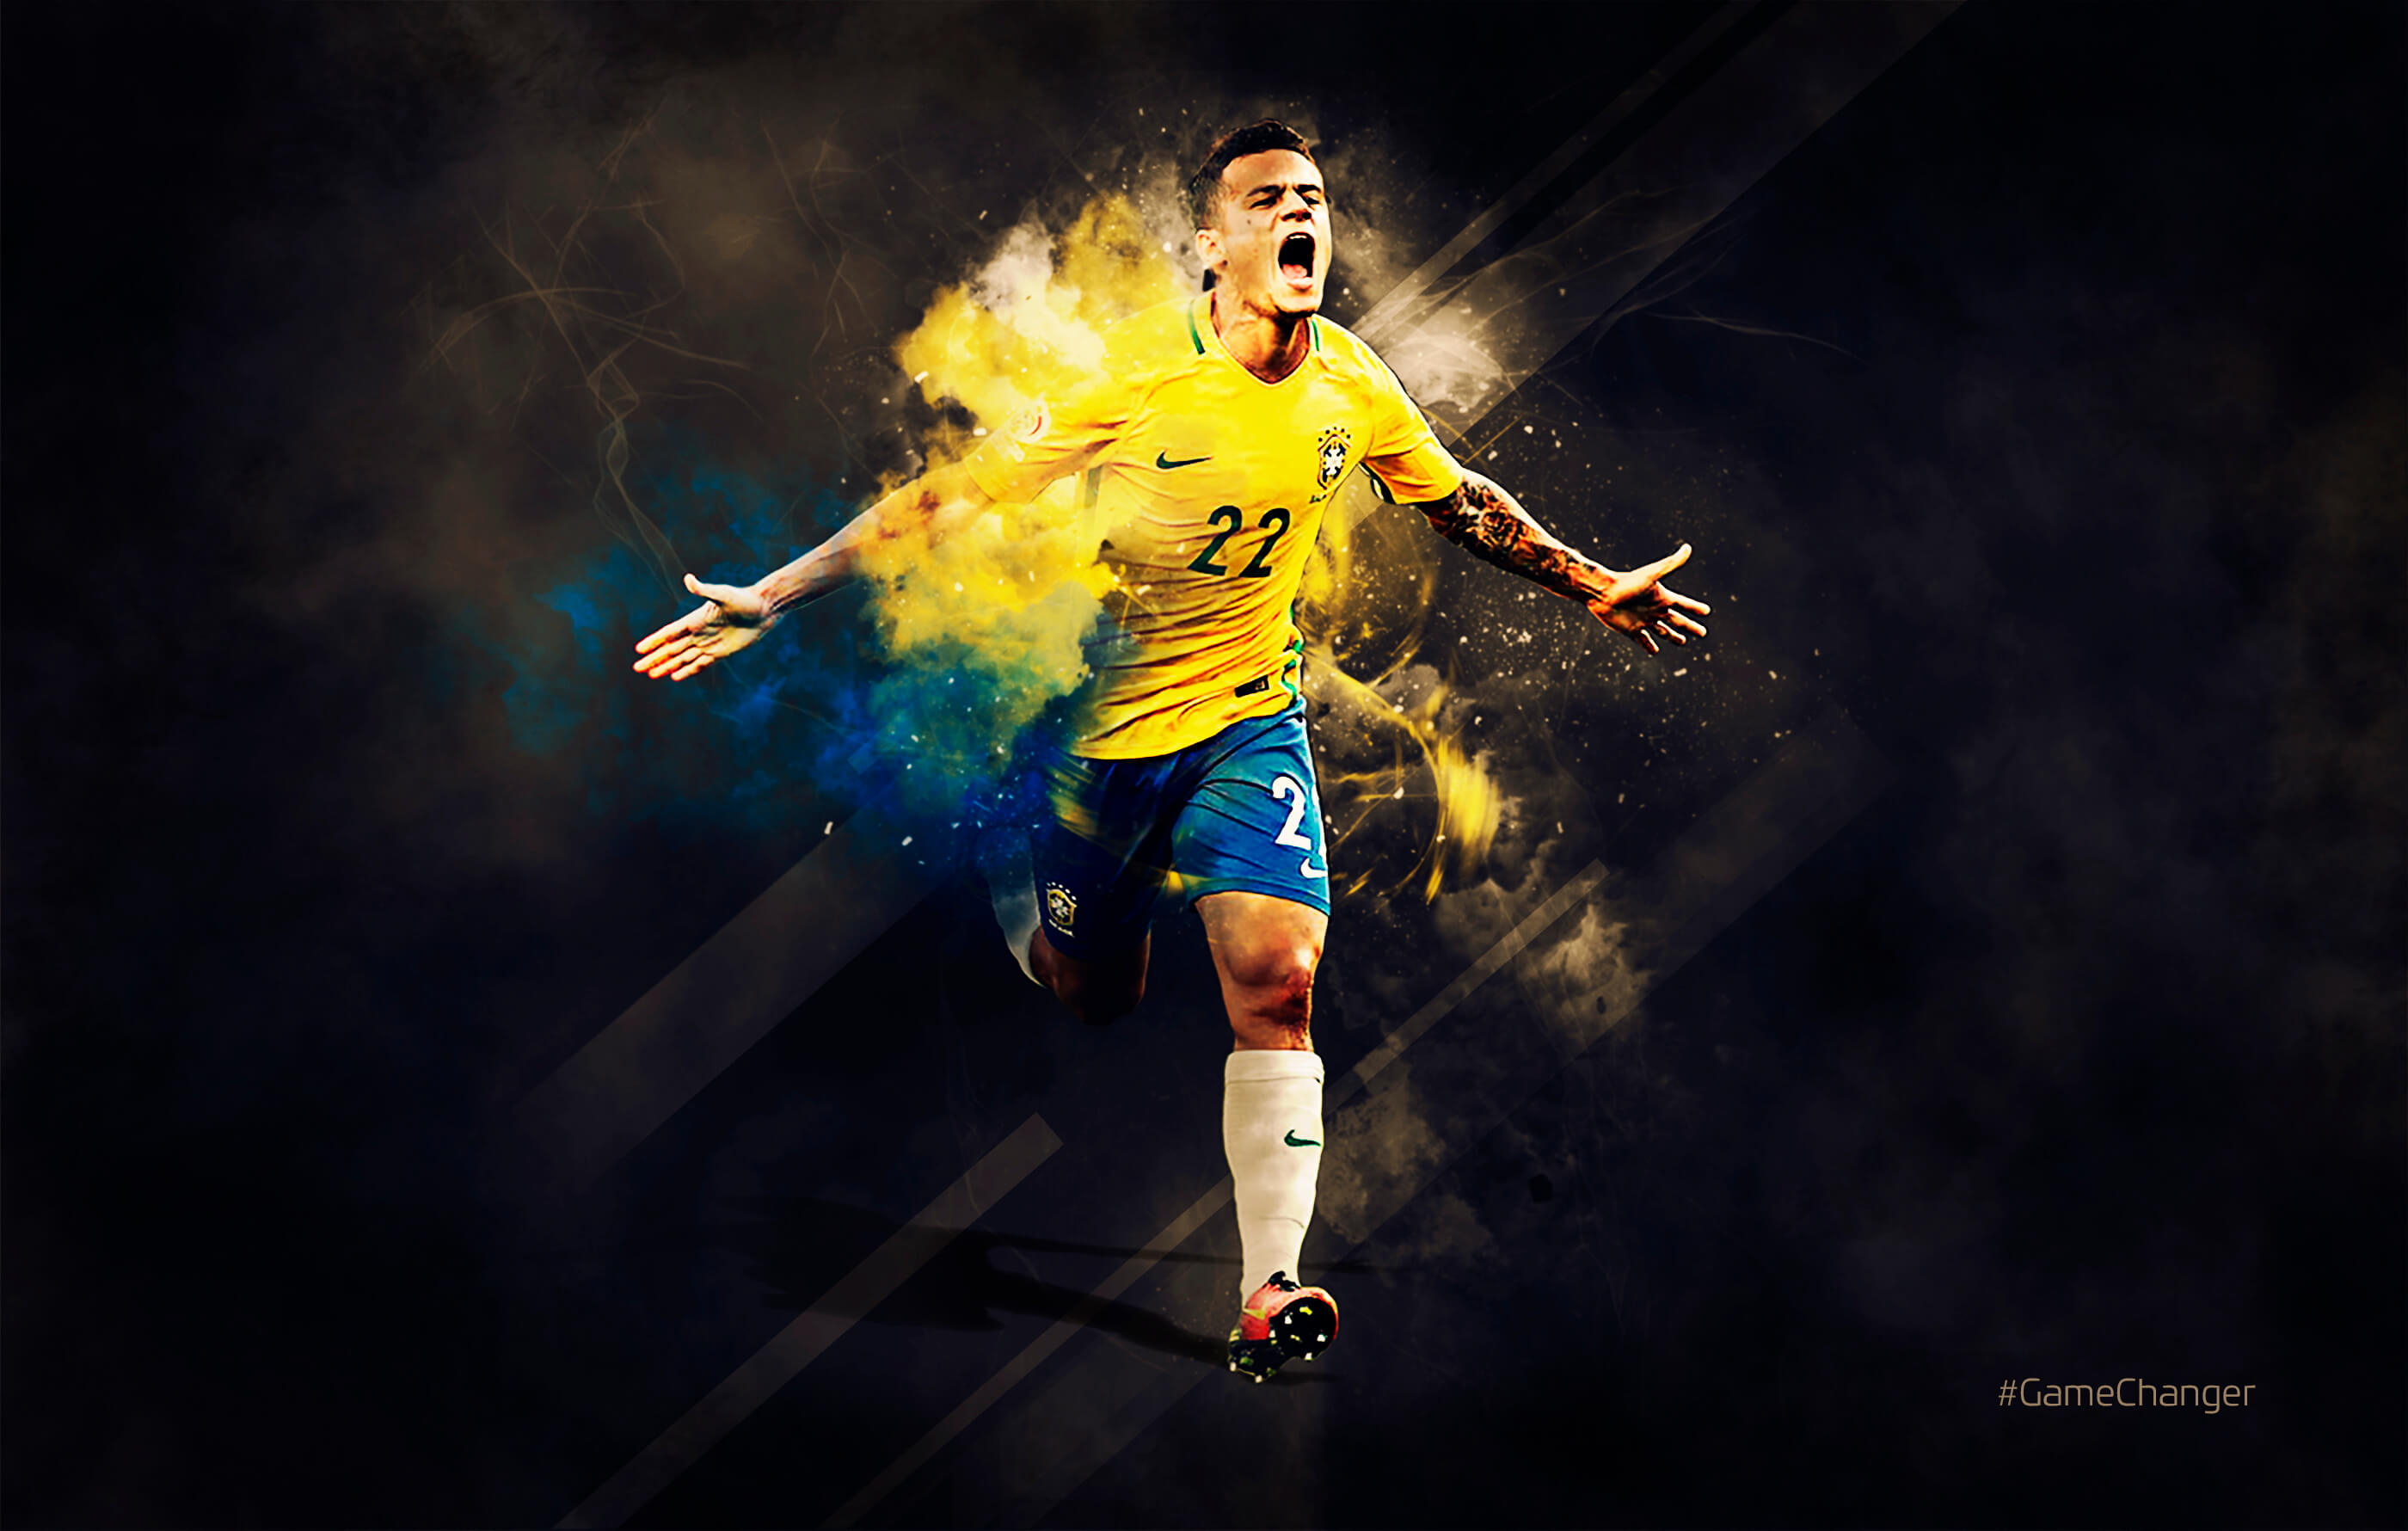 Brazilian professional footballer Philippe Coutinho wearing a yellow football shirt with number 22 on it and blue shorts